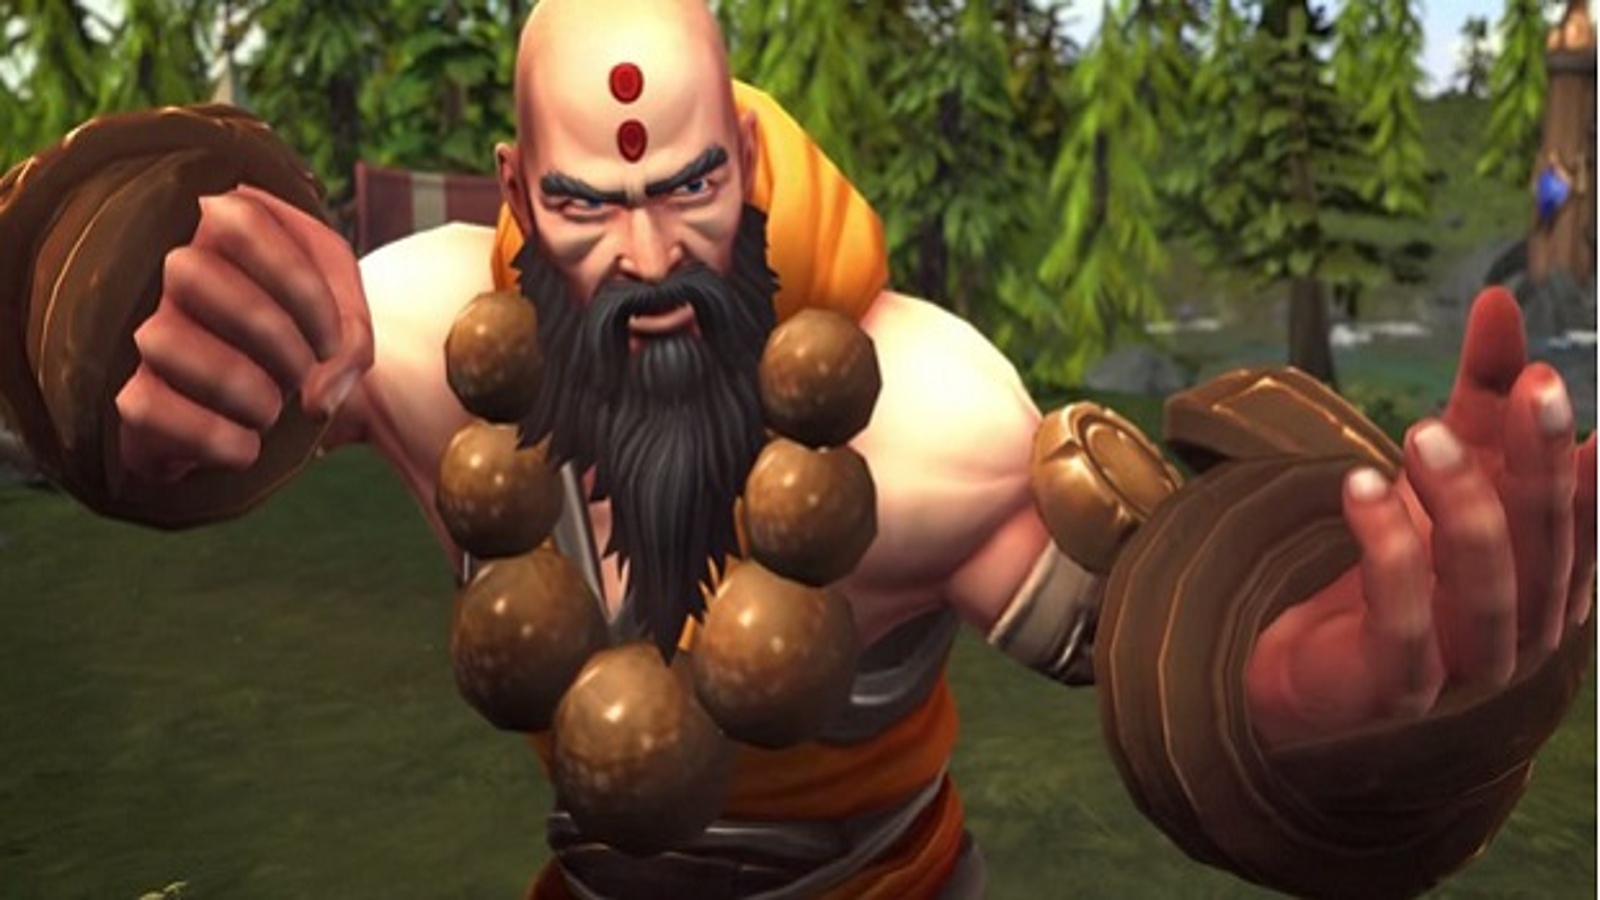 The Monk from Diablo 3 is coming to Heroes of the Storm